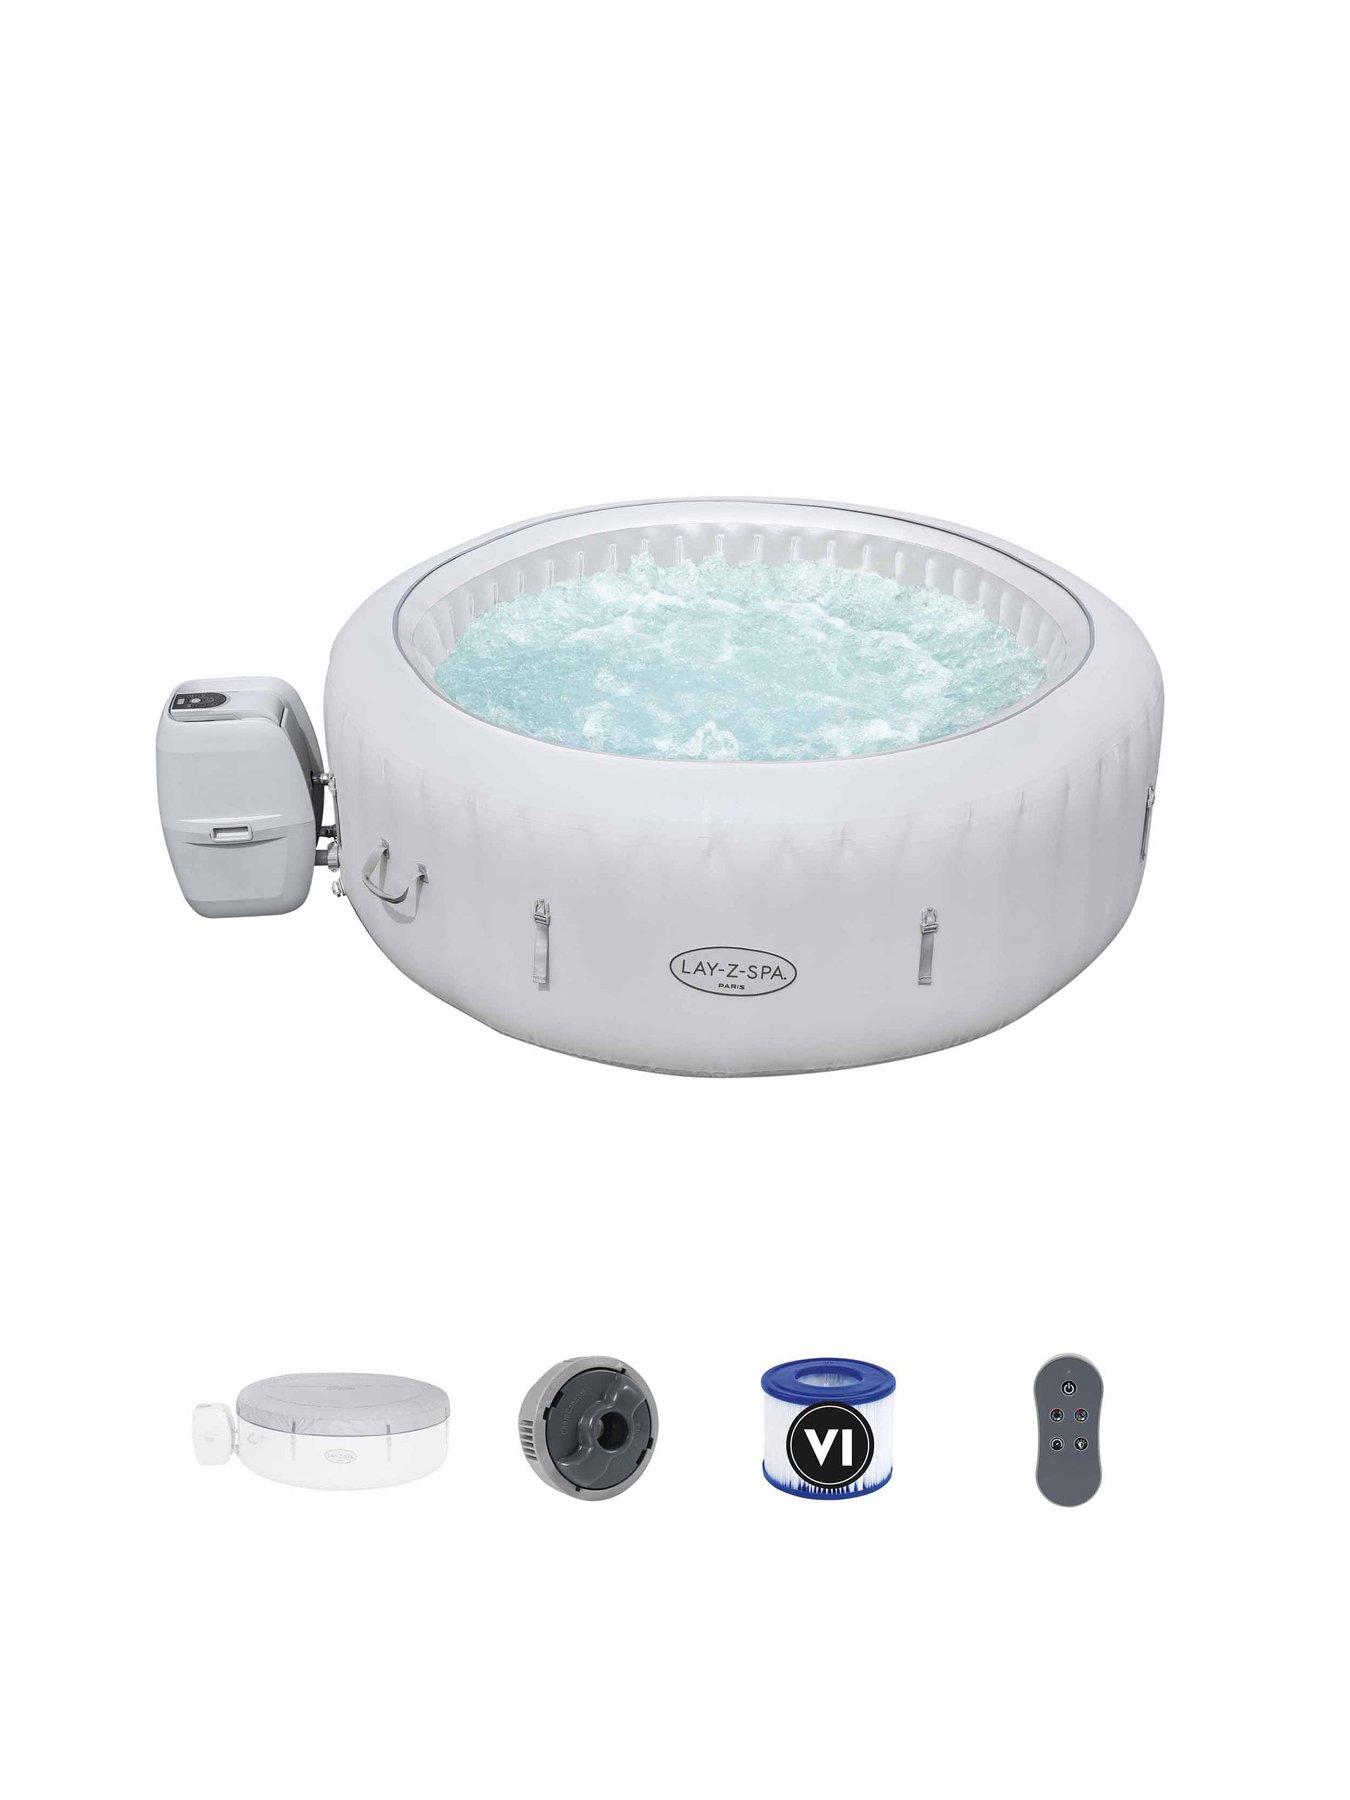 Lay-Z-Spa Paris AirJet Hot Tub for 4-6 Adults | very.co.uk